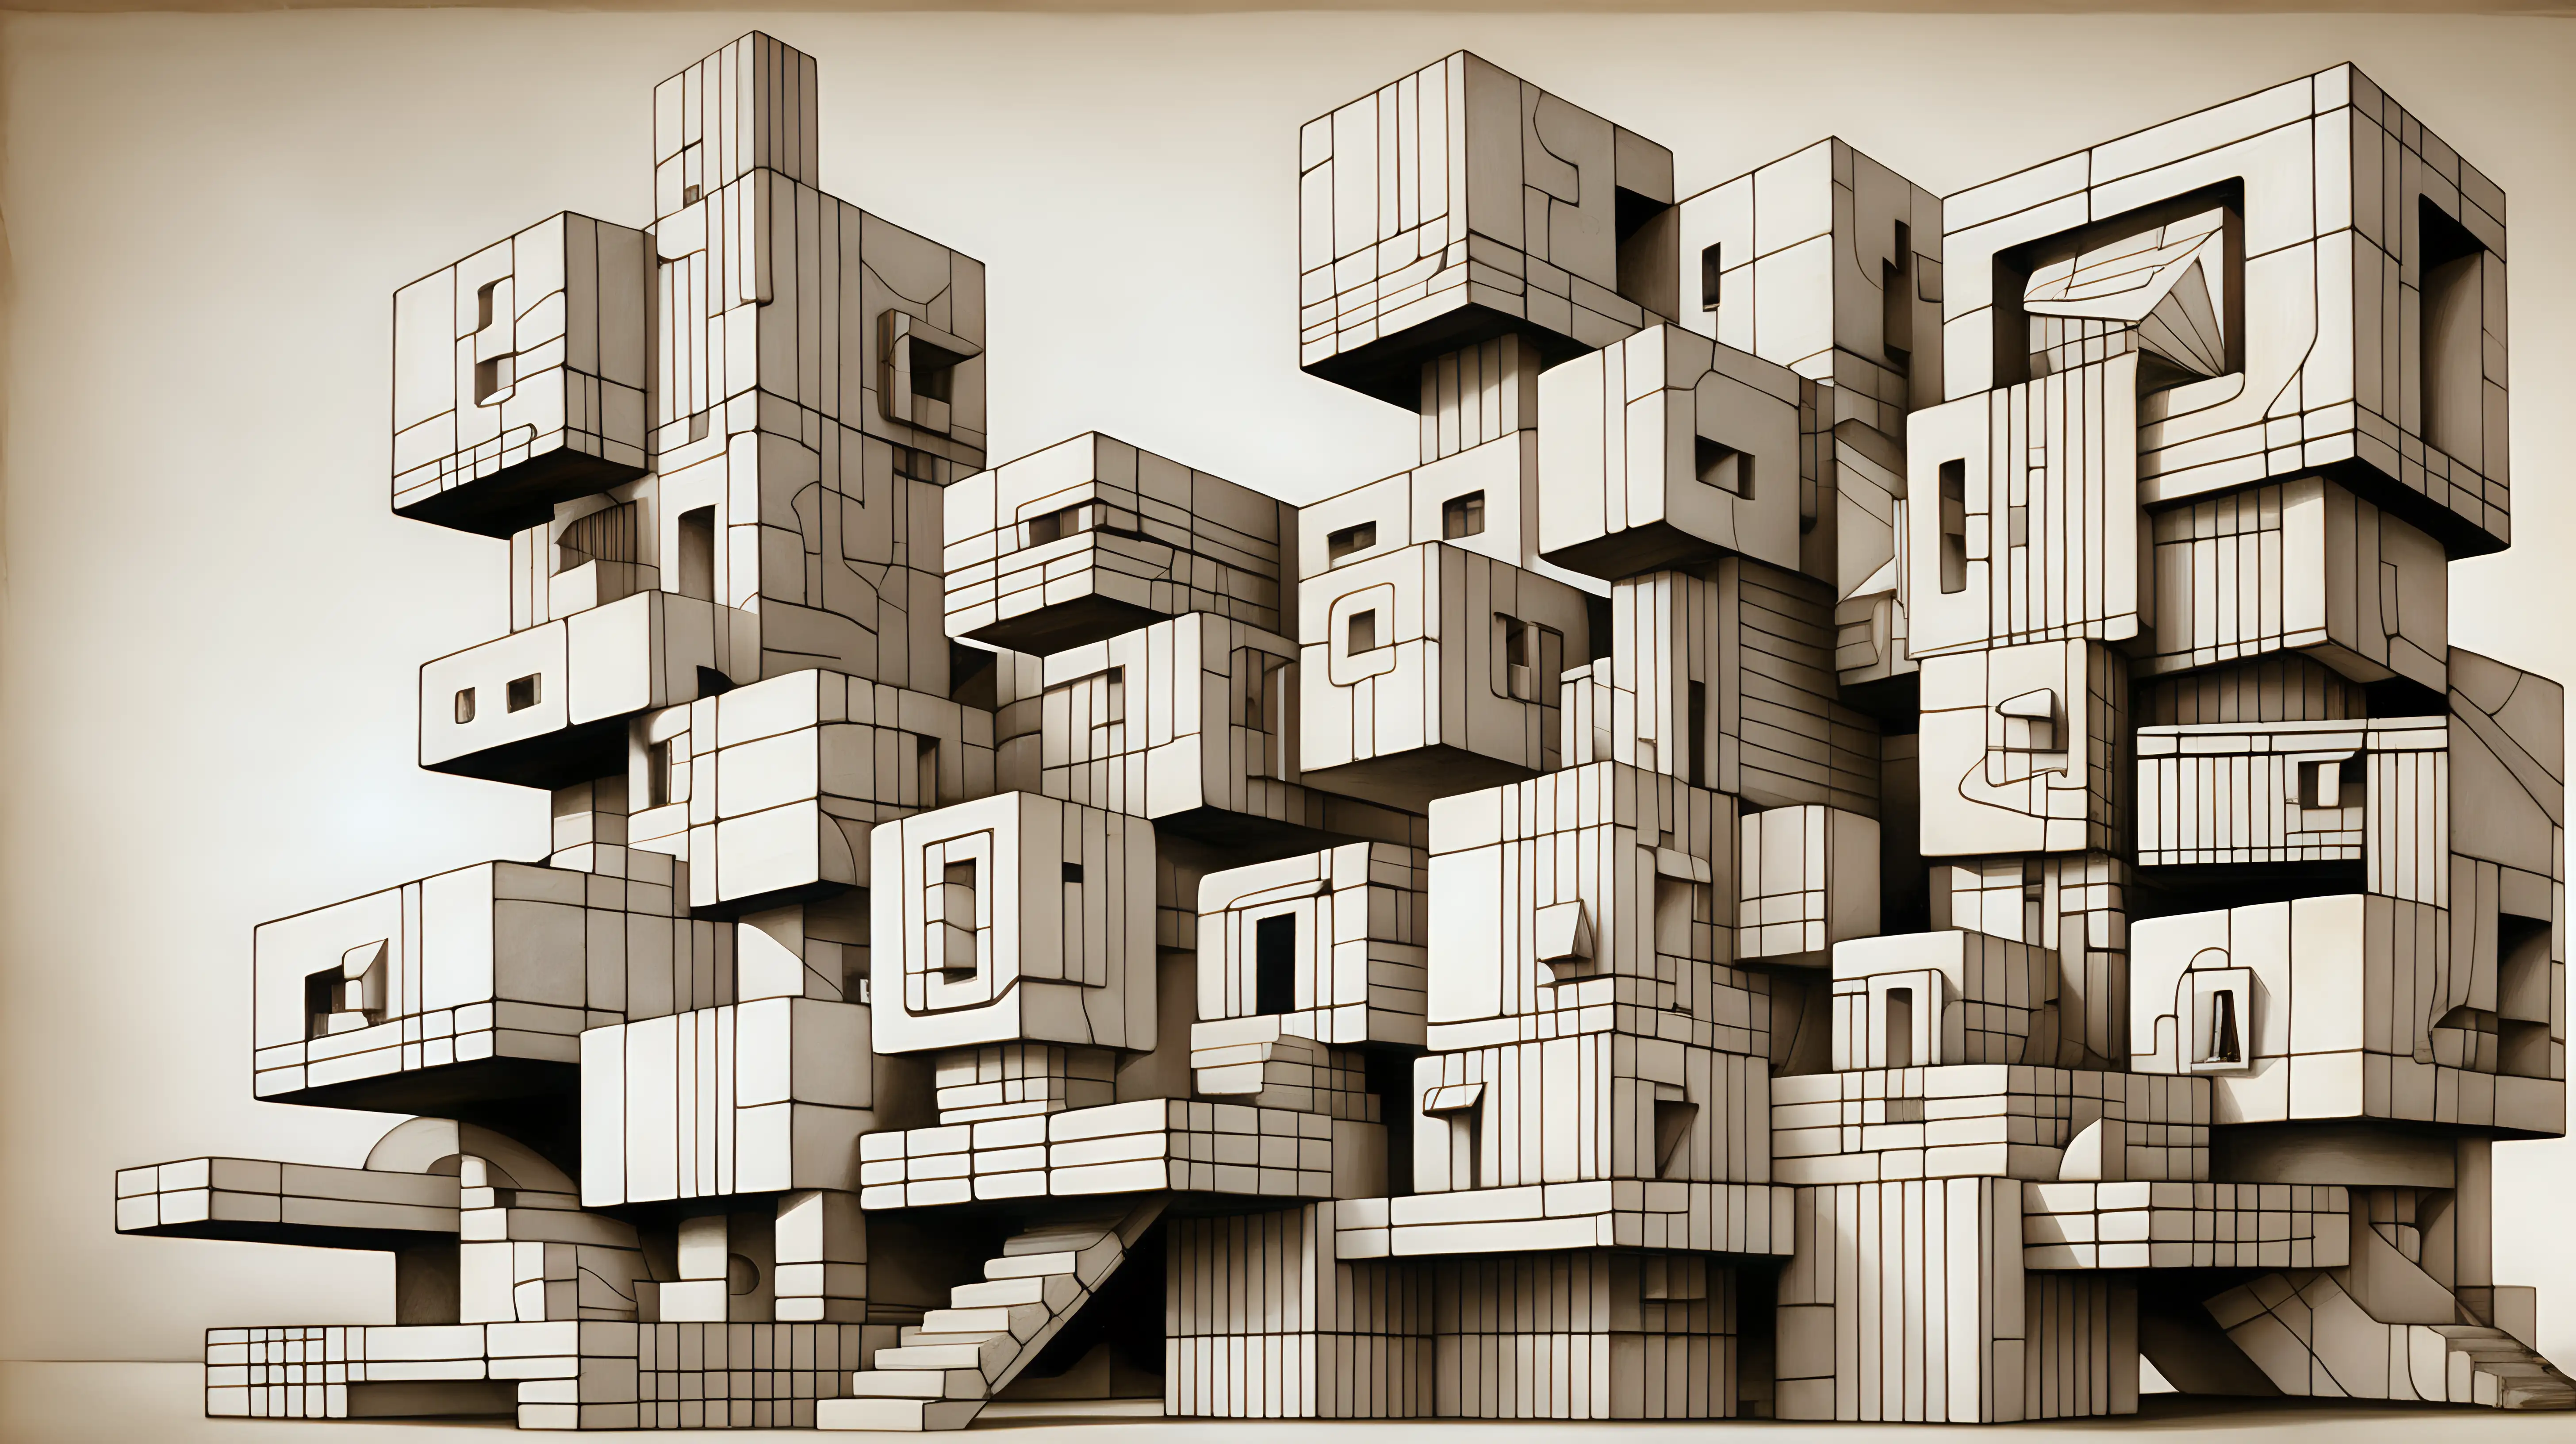 Cubist Dream Architecture: Design an architectural marvel inspired by Cubist principles, where buildings twist and morph into abstract shapes, blurring the line between structure and imagination.